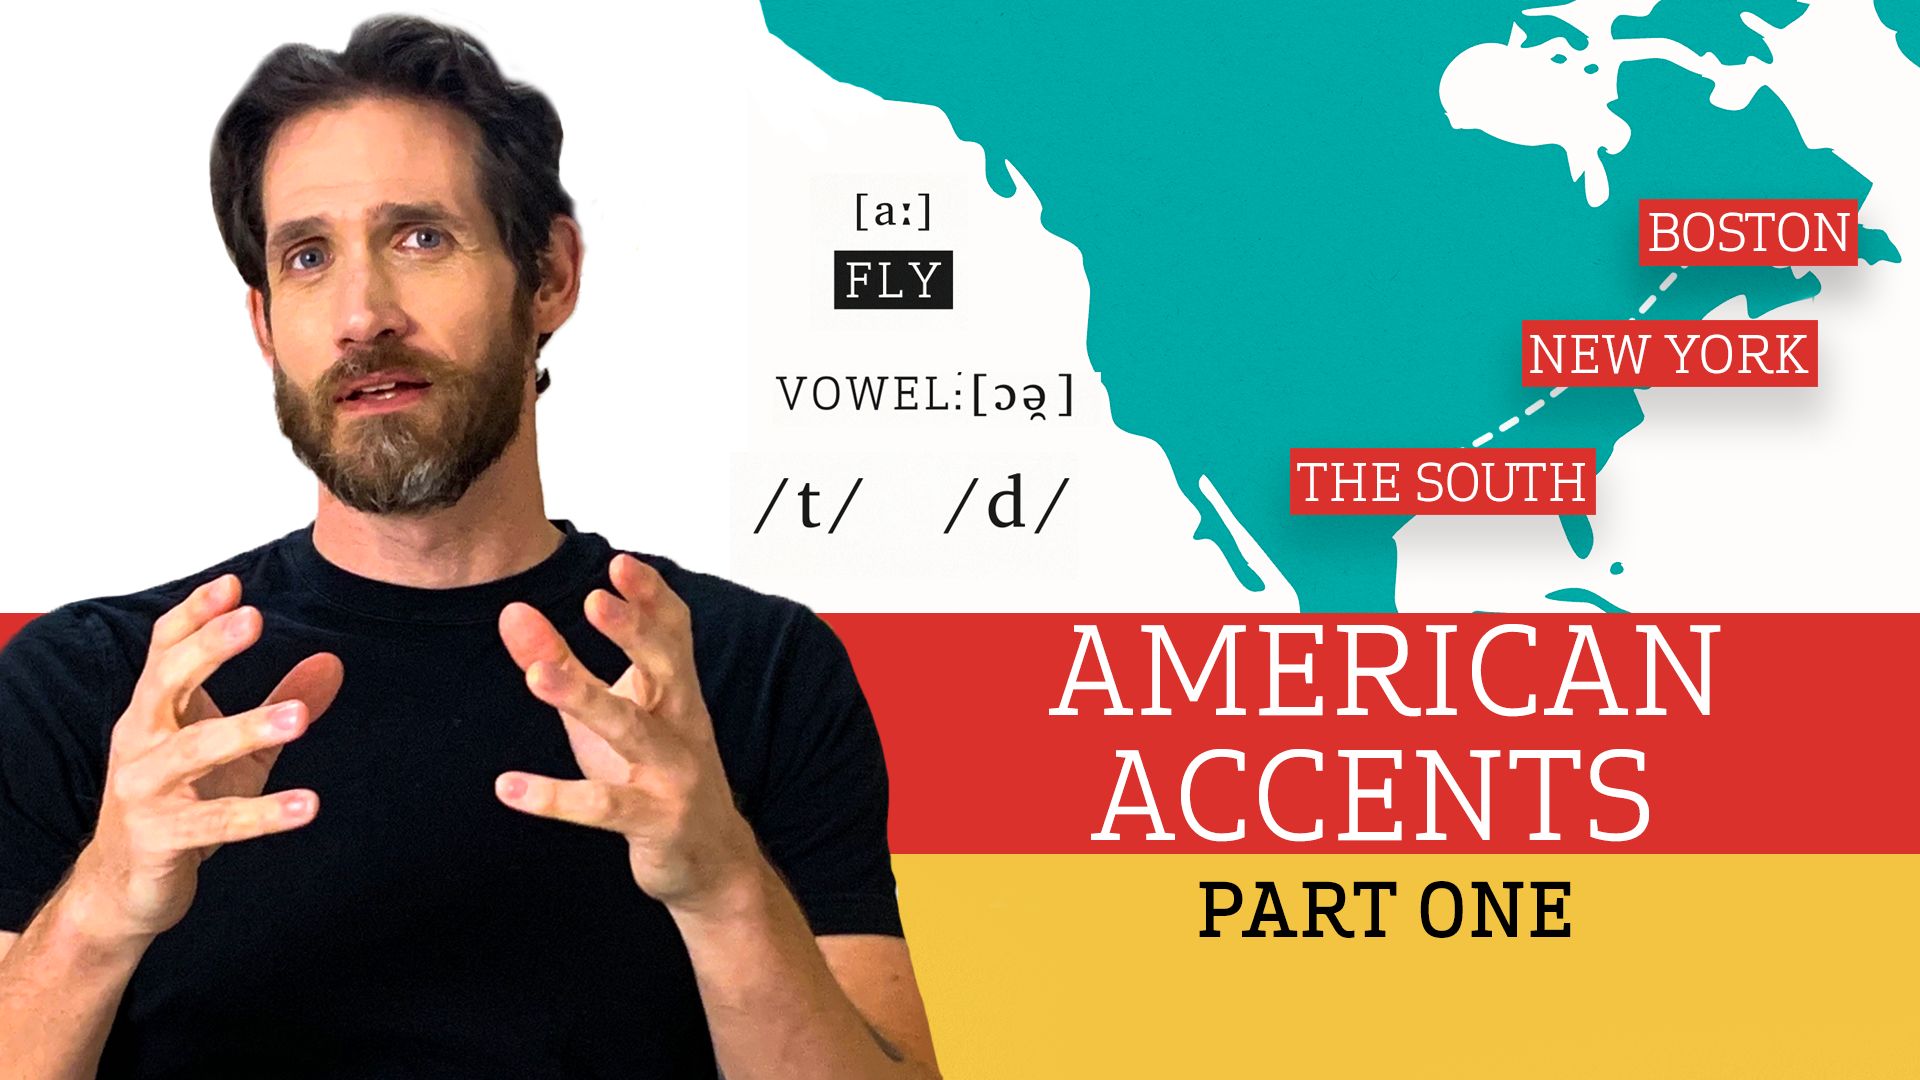 expert accent gives tour accents wired singer deserving thoughts random thread own erik dialect coach